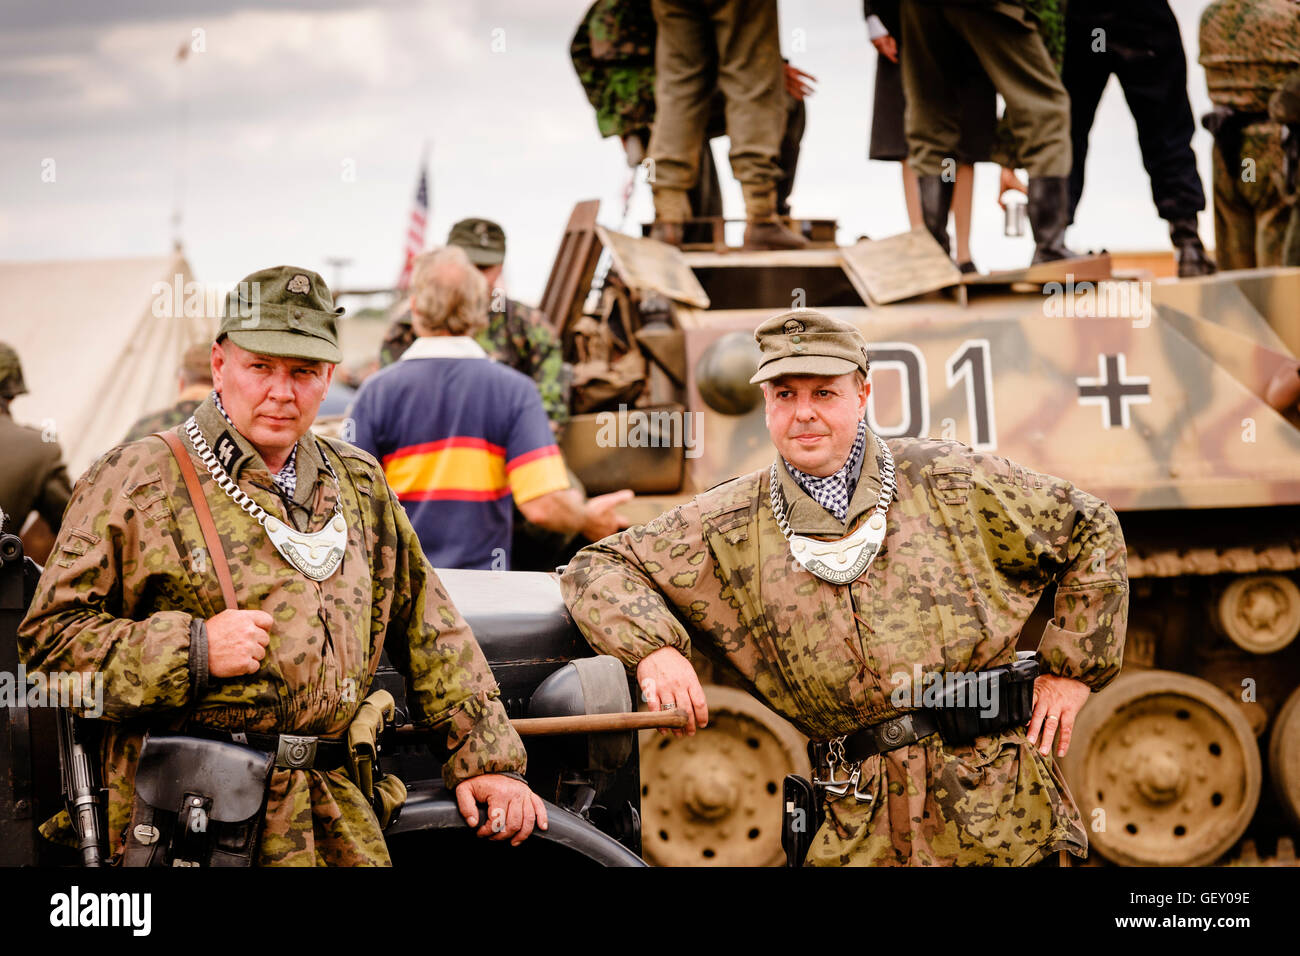 Posing in German SS uniforms at The 6th Annual Combined Ops Show. Stock Photo